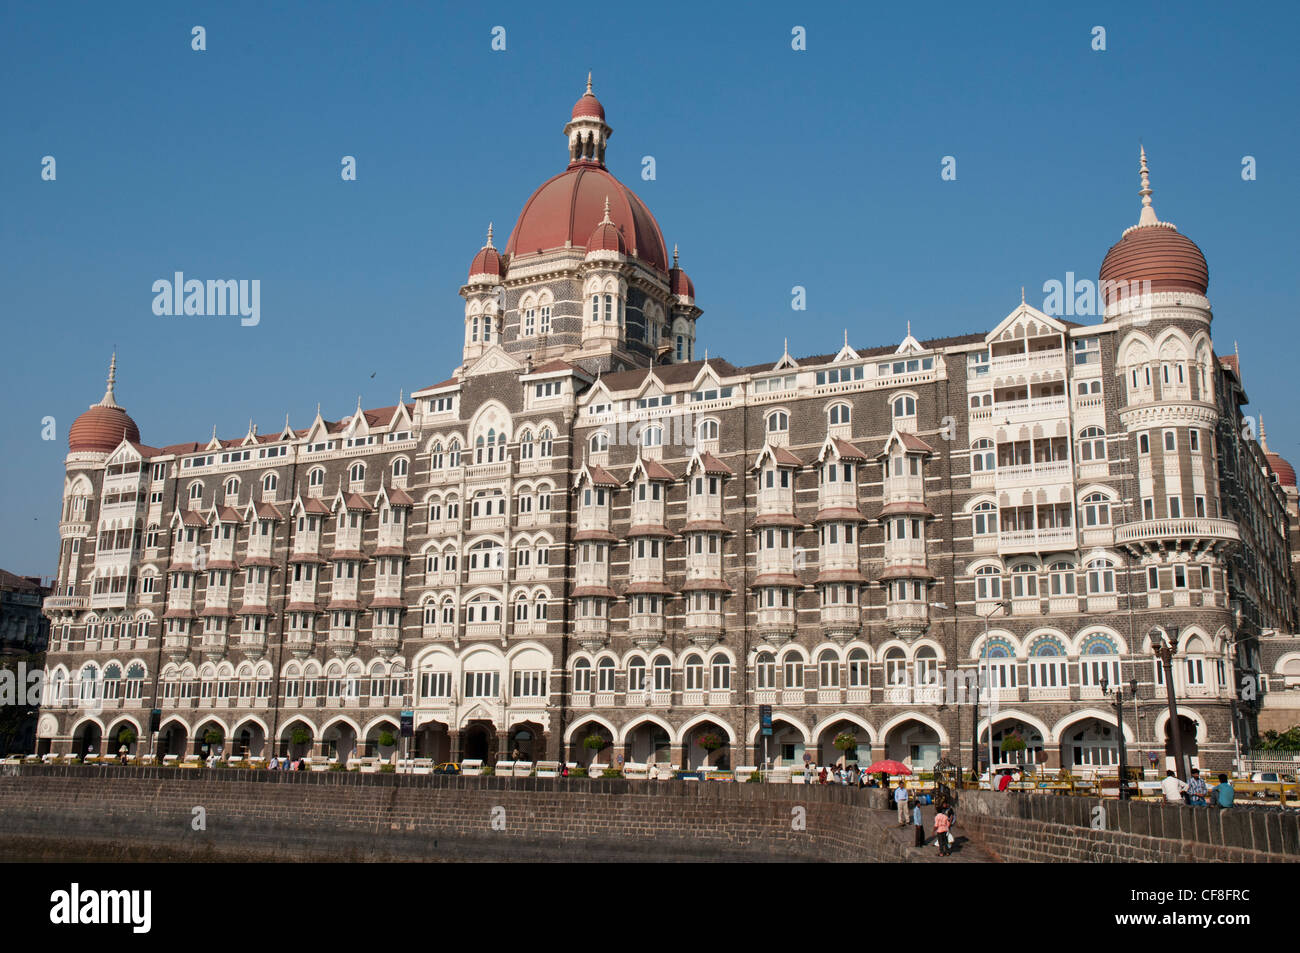 Taj Mahal Palace Hotel seen from the Gateway of India monument on the seafront at Mumbai Stock Photo